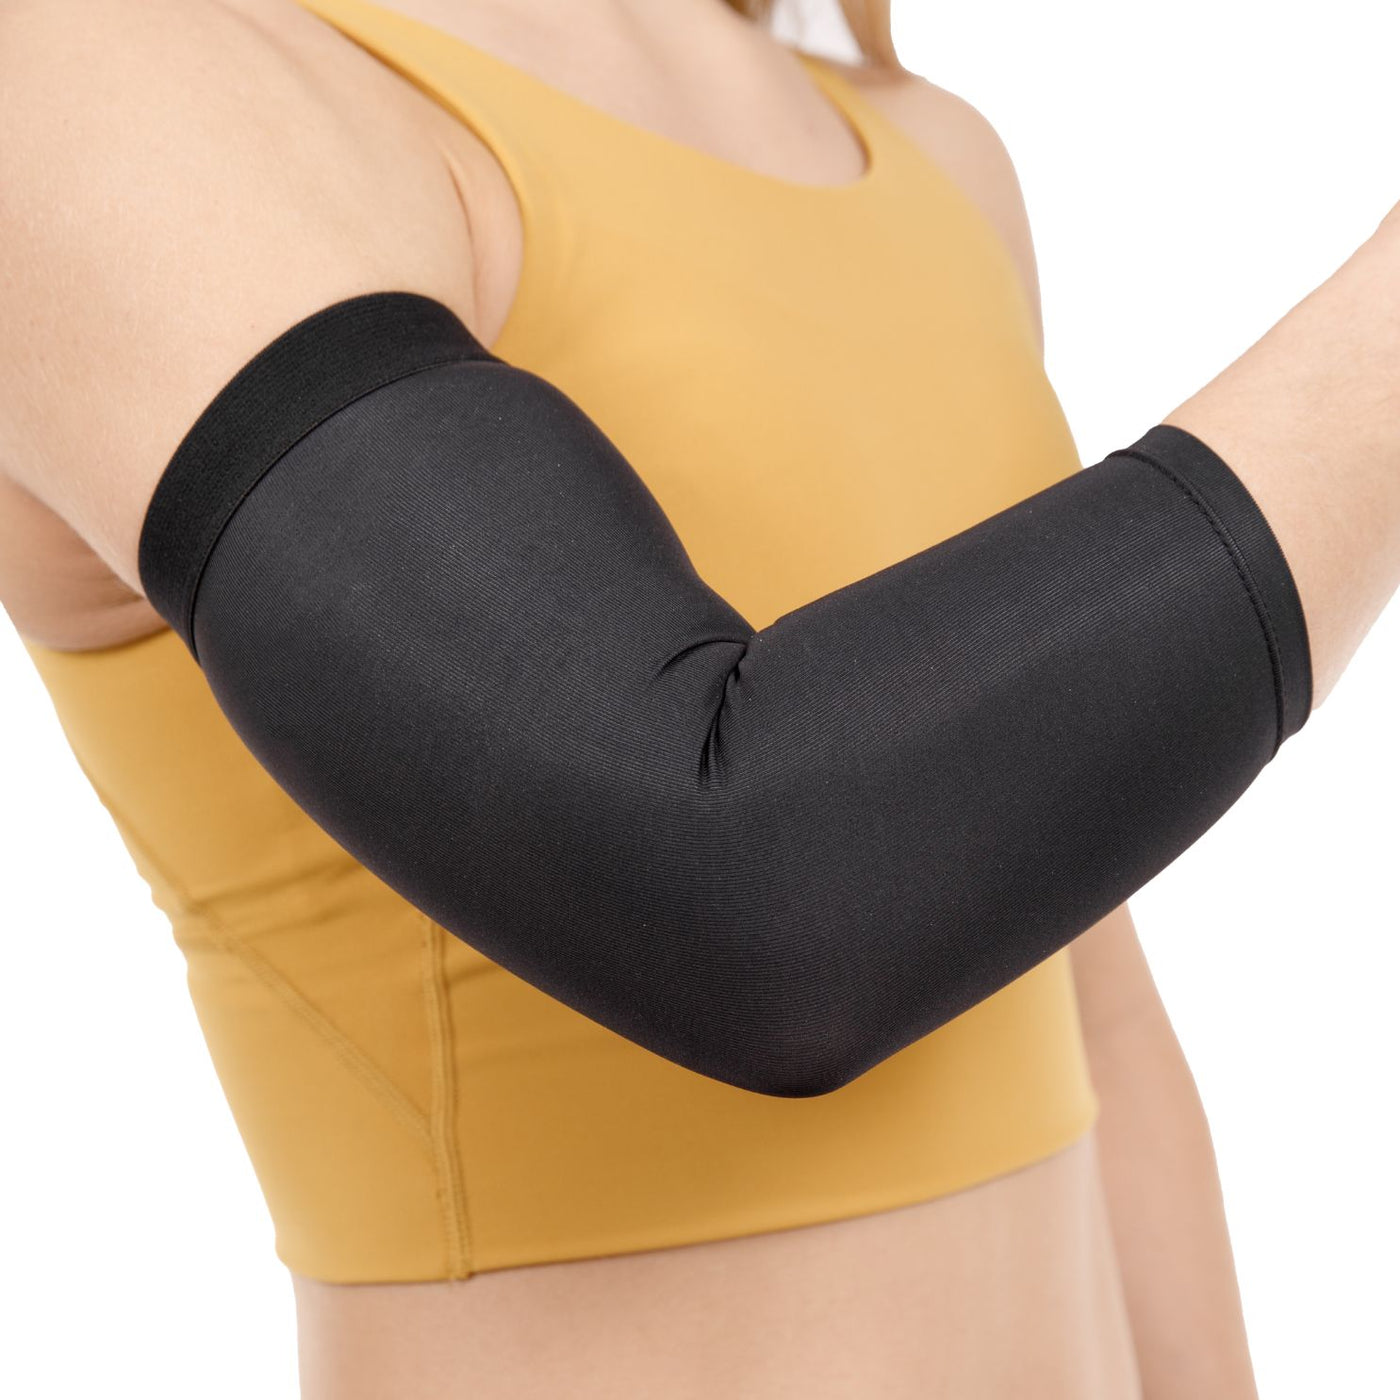  Copper Compression Arm Sleeve - Copper Infused Full Arm Brace  For Forearm